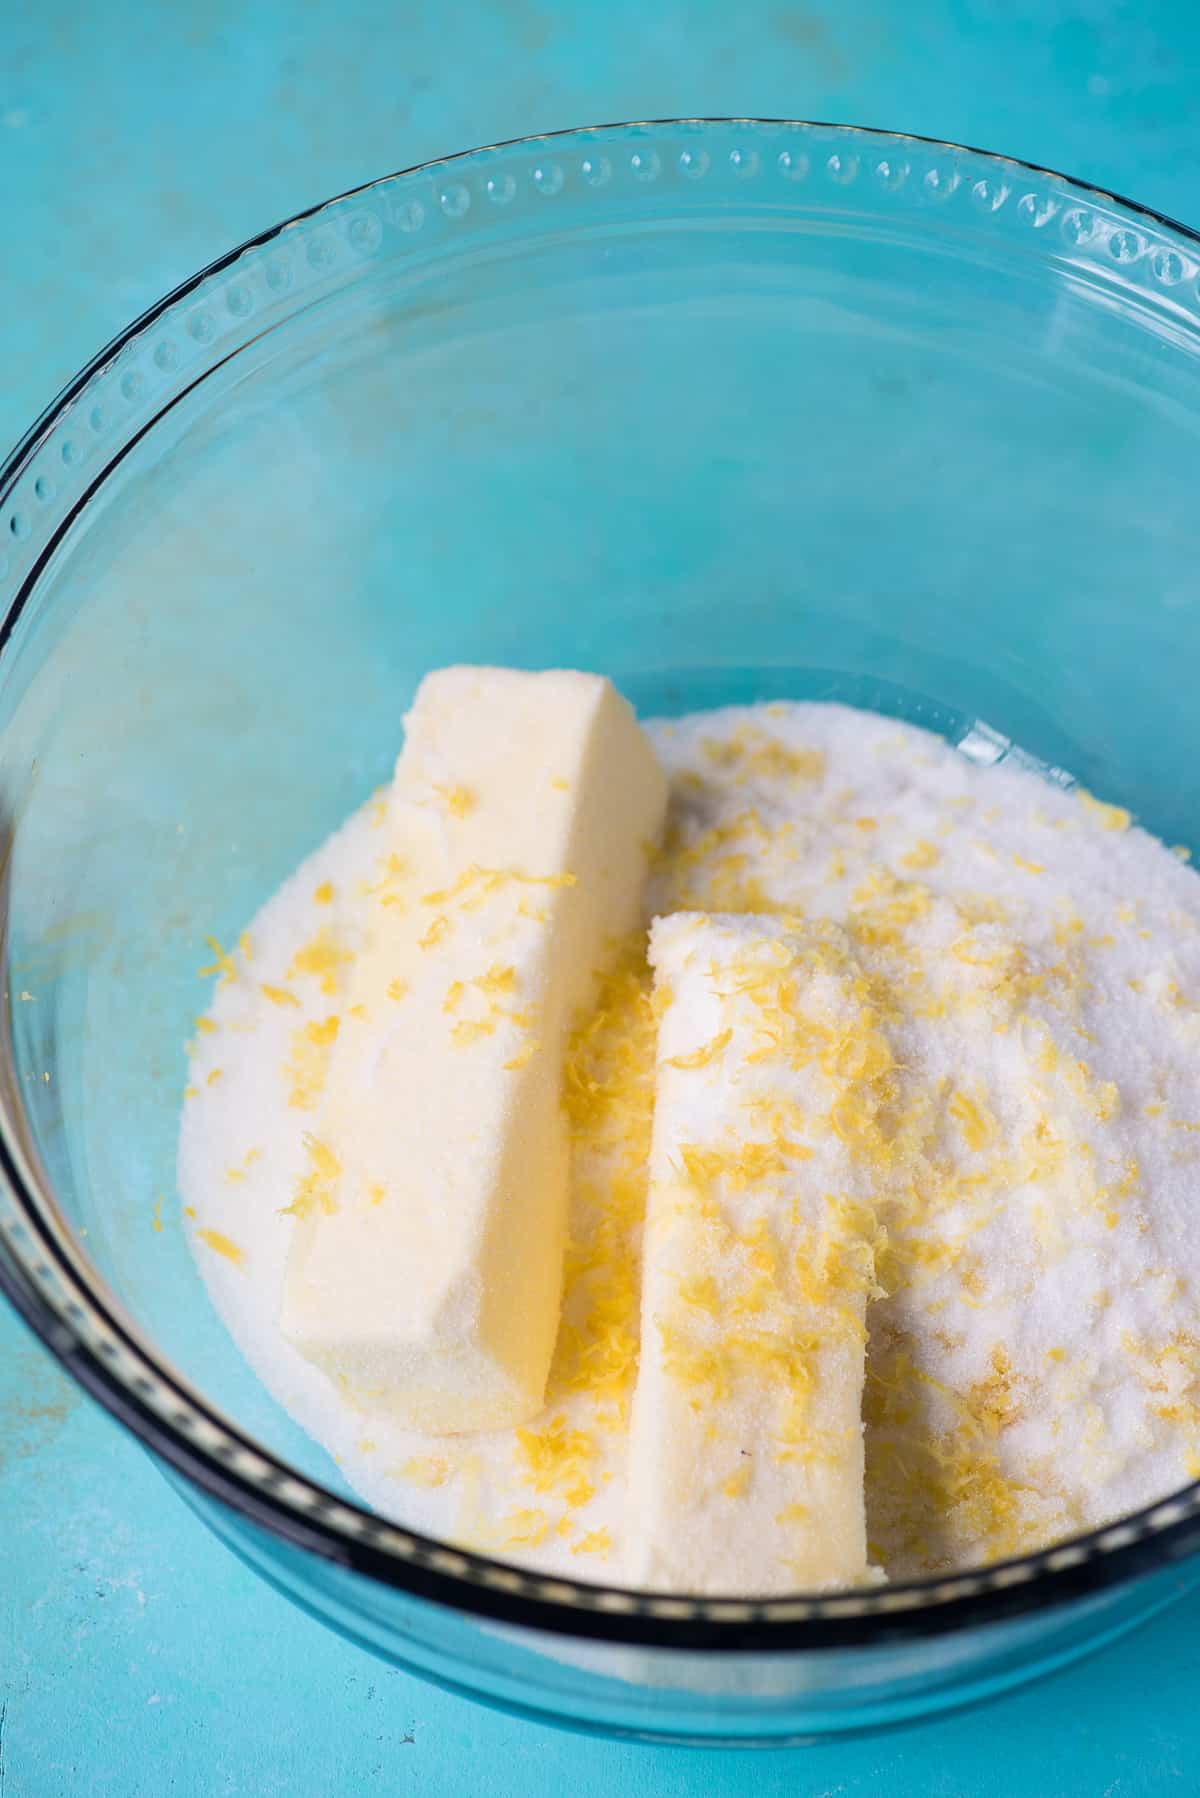 butter, granulated sugar and lemon zest in a glass bowl on blue background